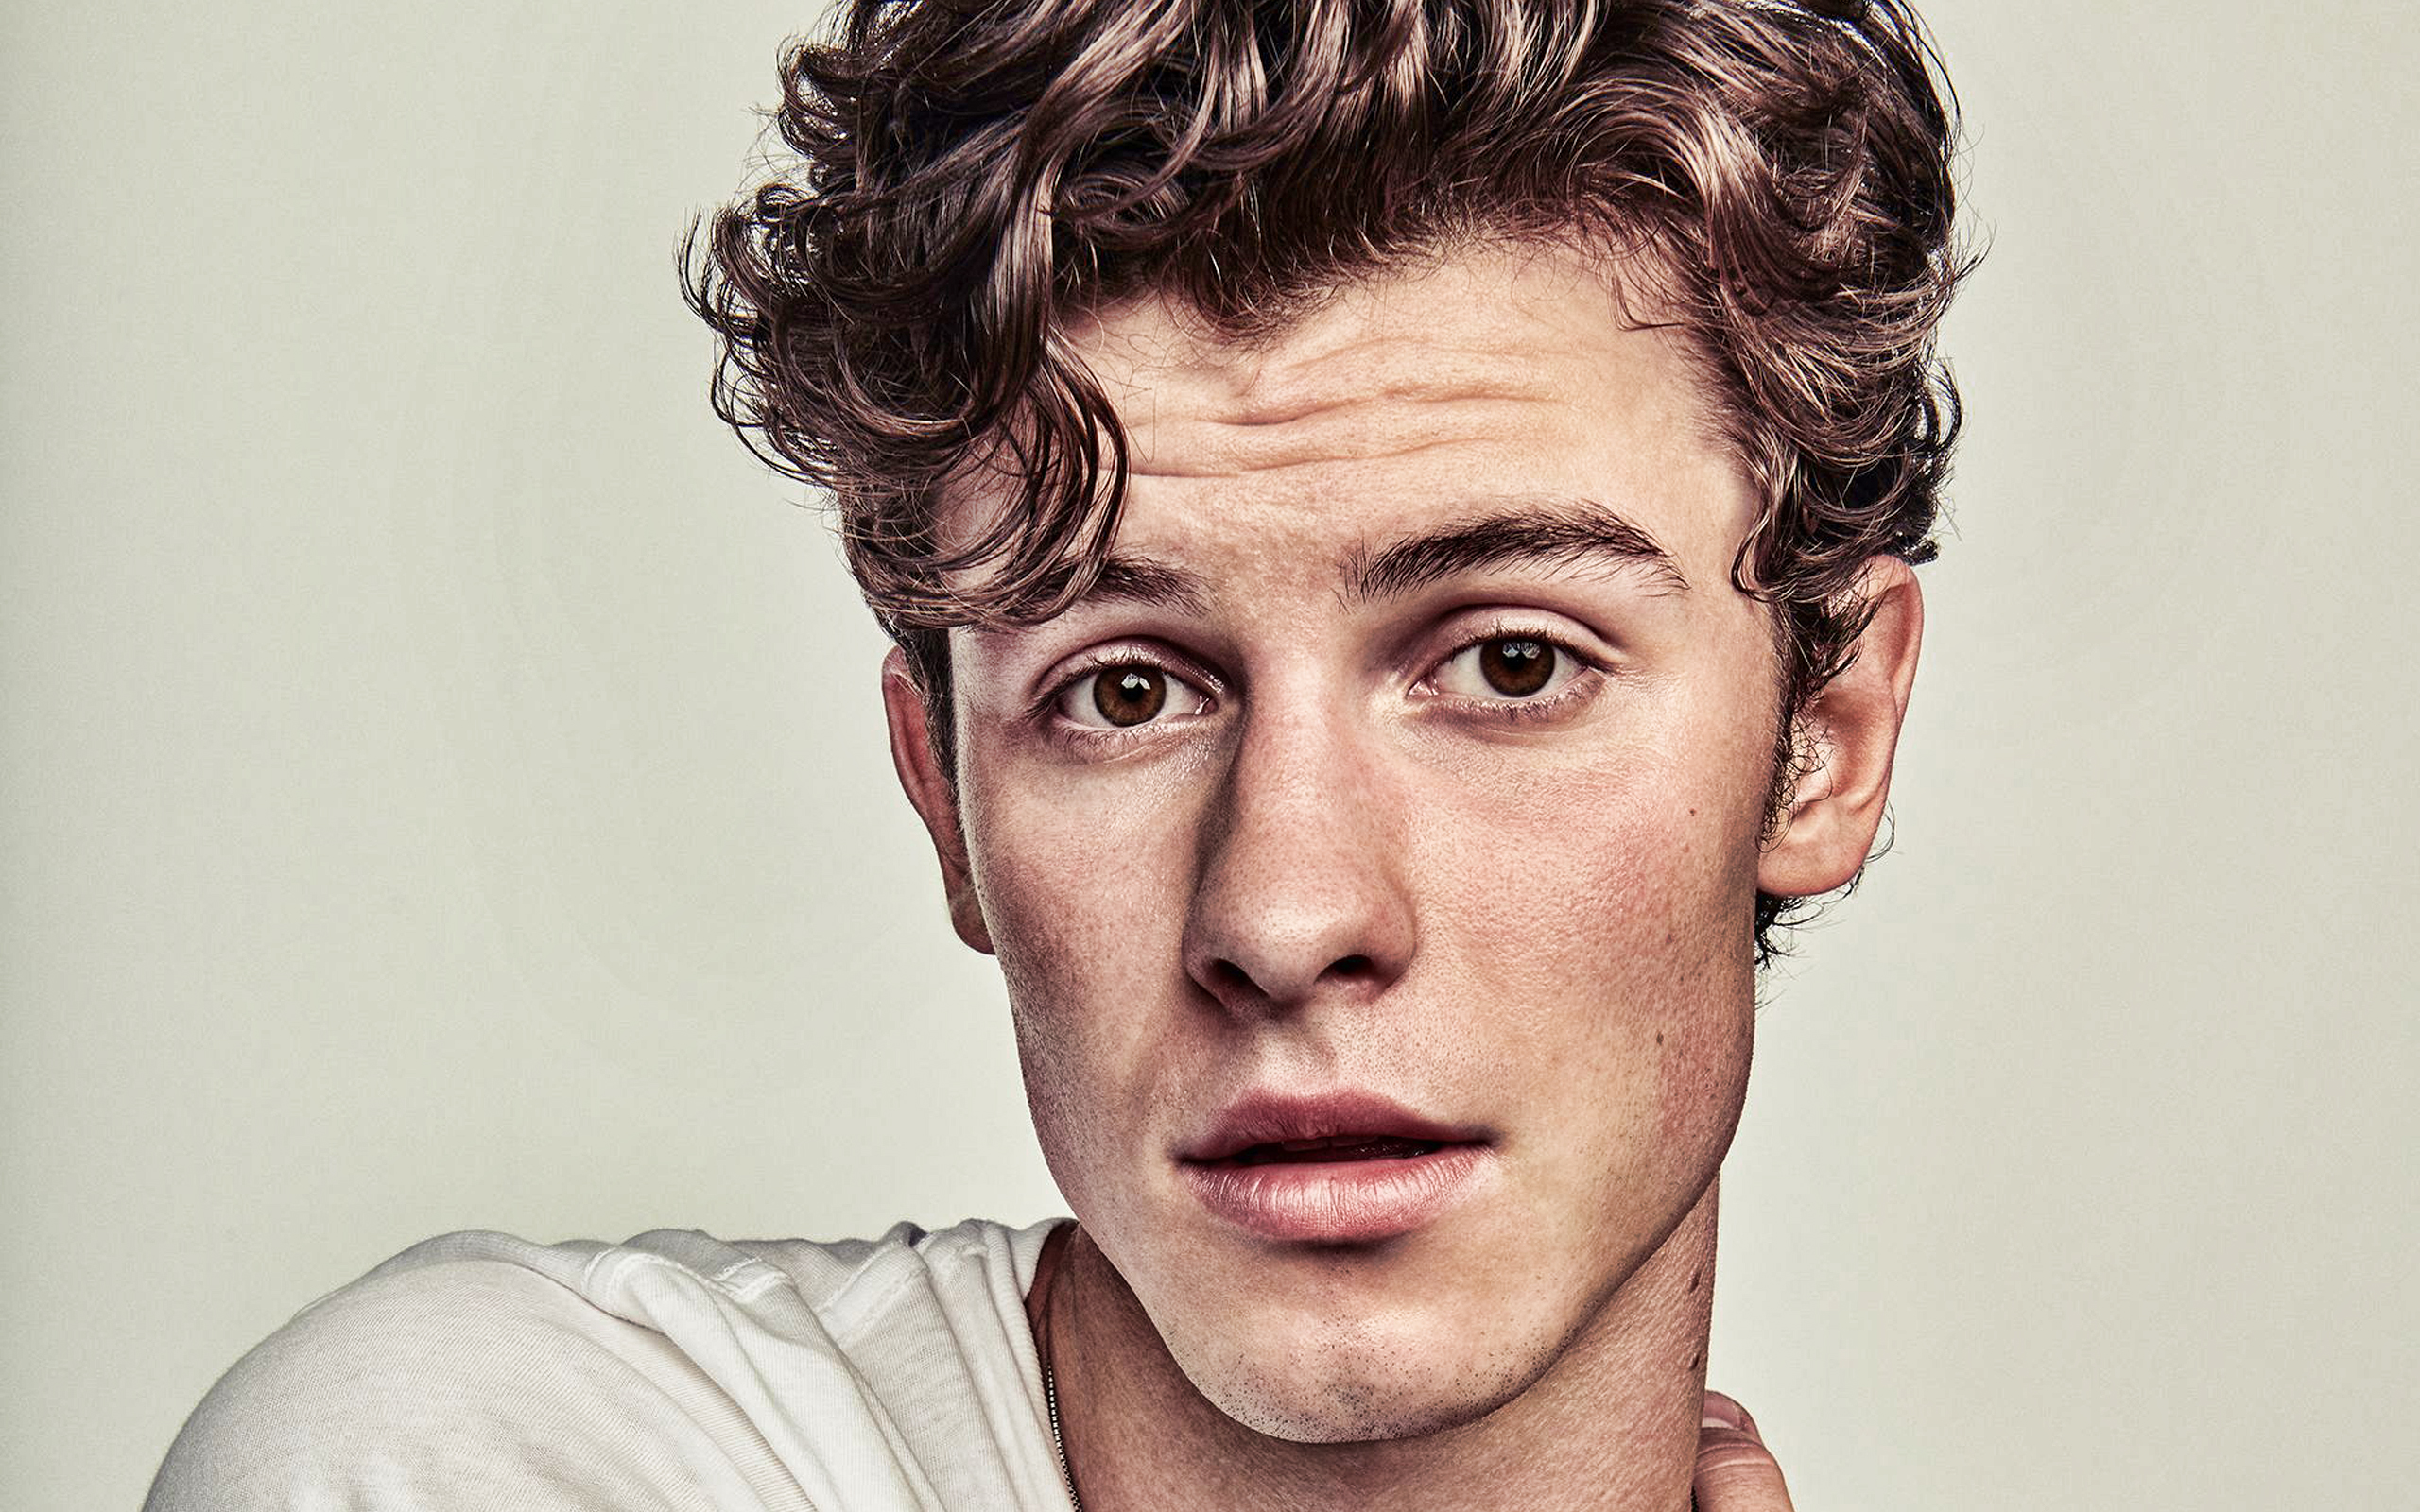 Shawn Mendes, Canadian Singer, Portrait, Canadian Star, - Shawn Mendes Photoshoot 2018 - HD Wallpaper 